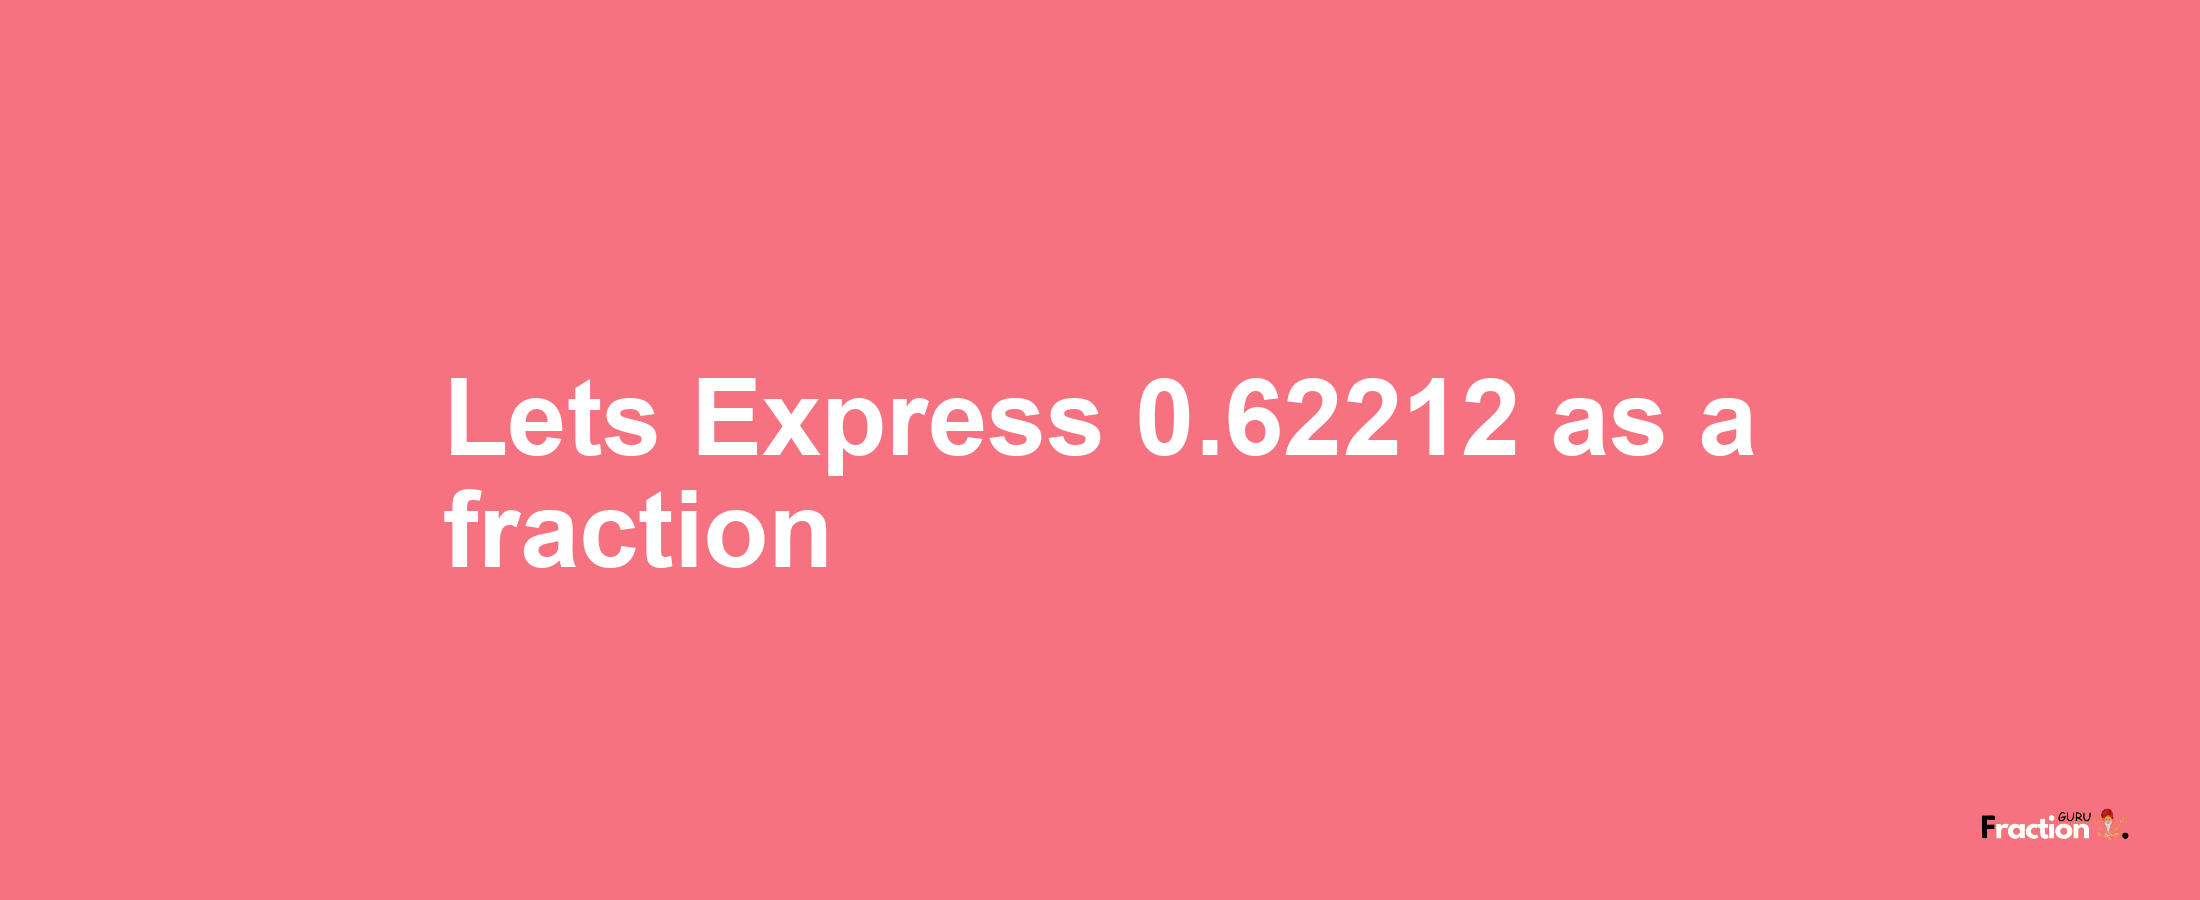 Lets Express 0.62212 as afraction